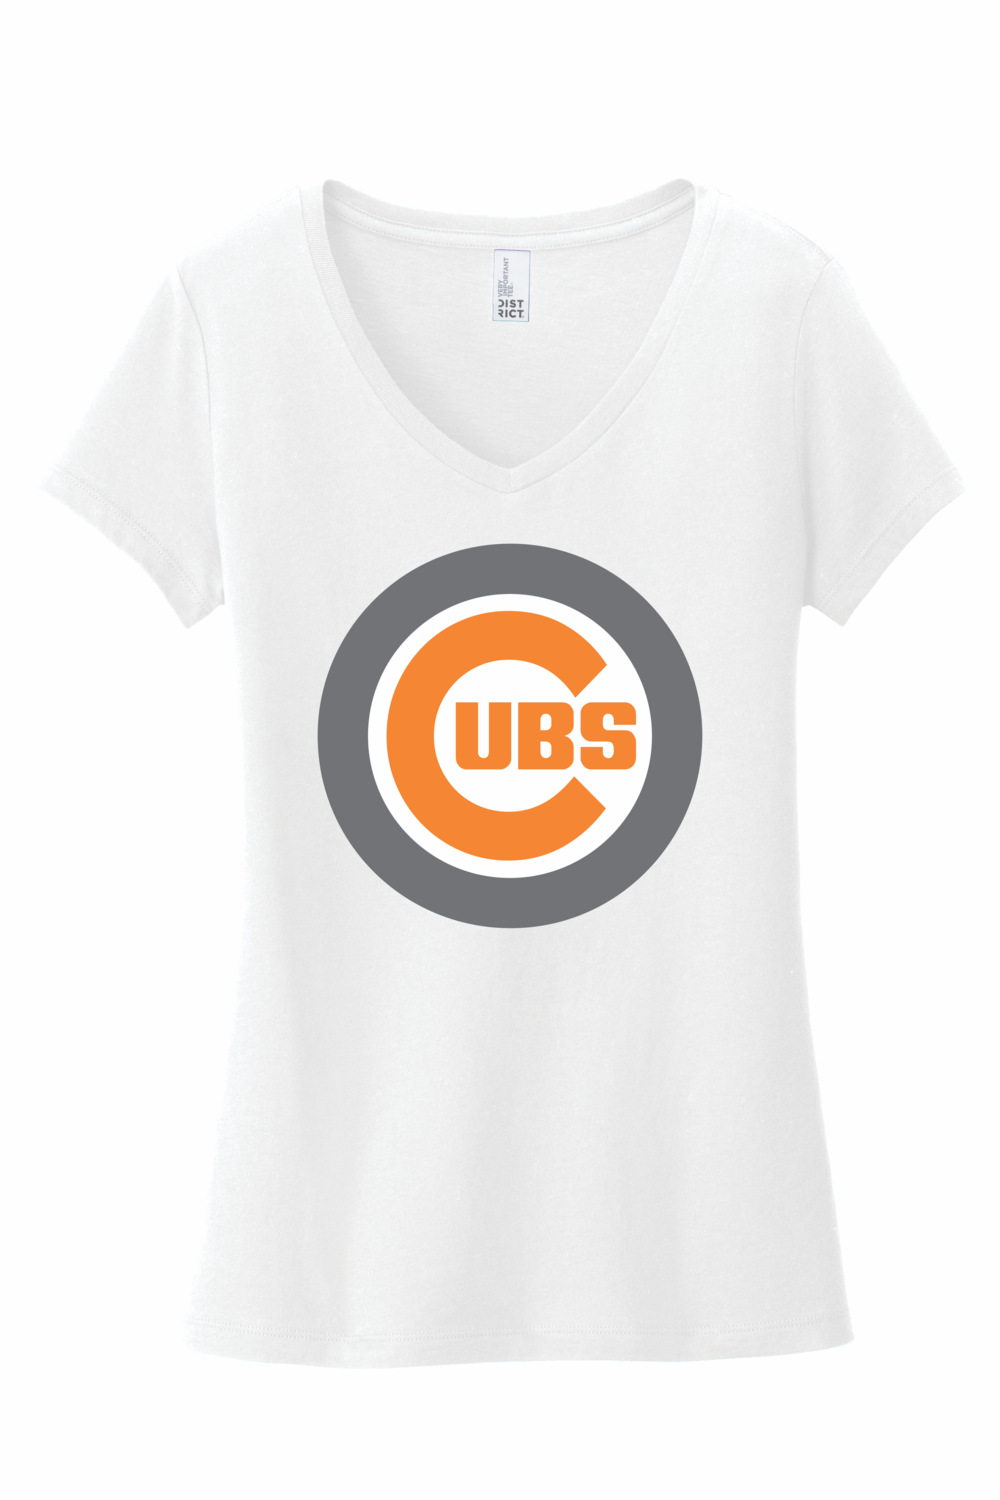 DT6503
District ® Women’s Very Important Tee ® V-Neck